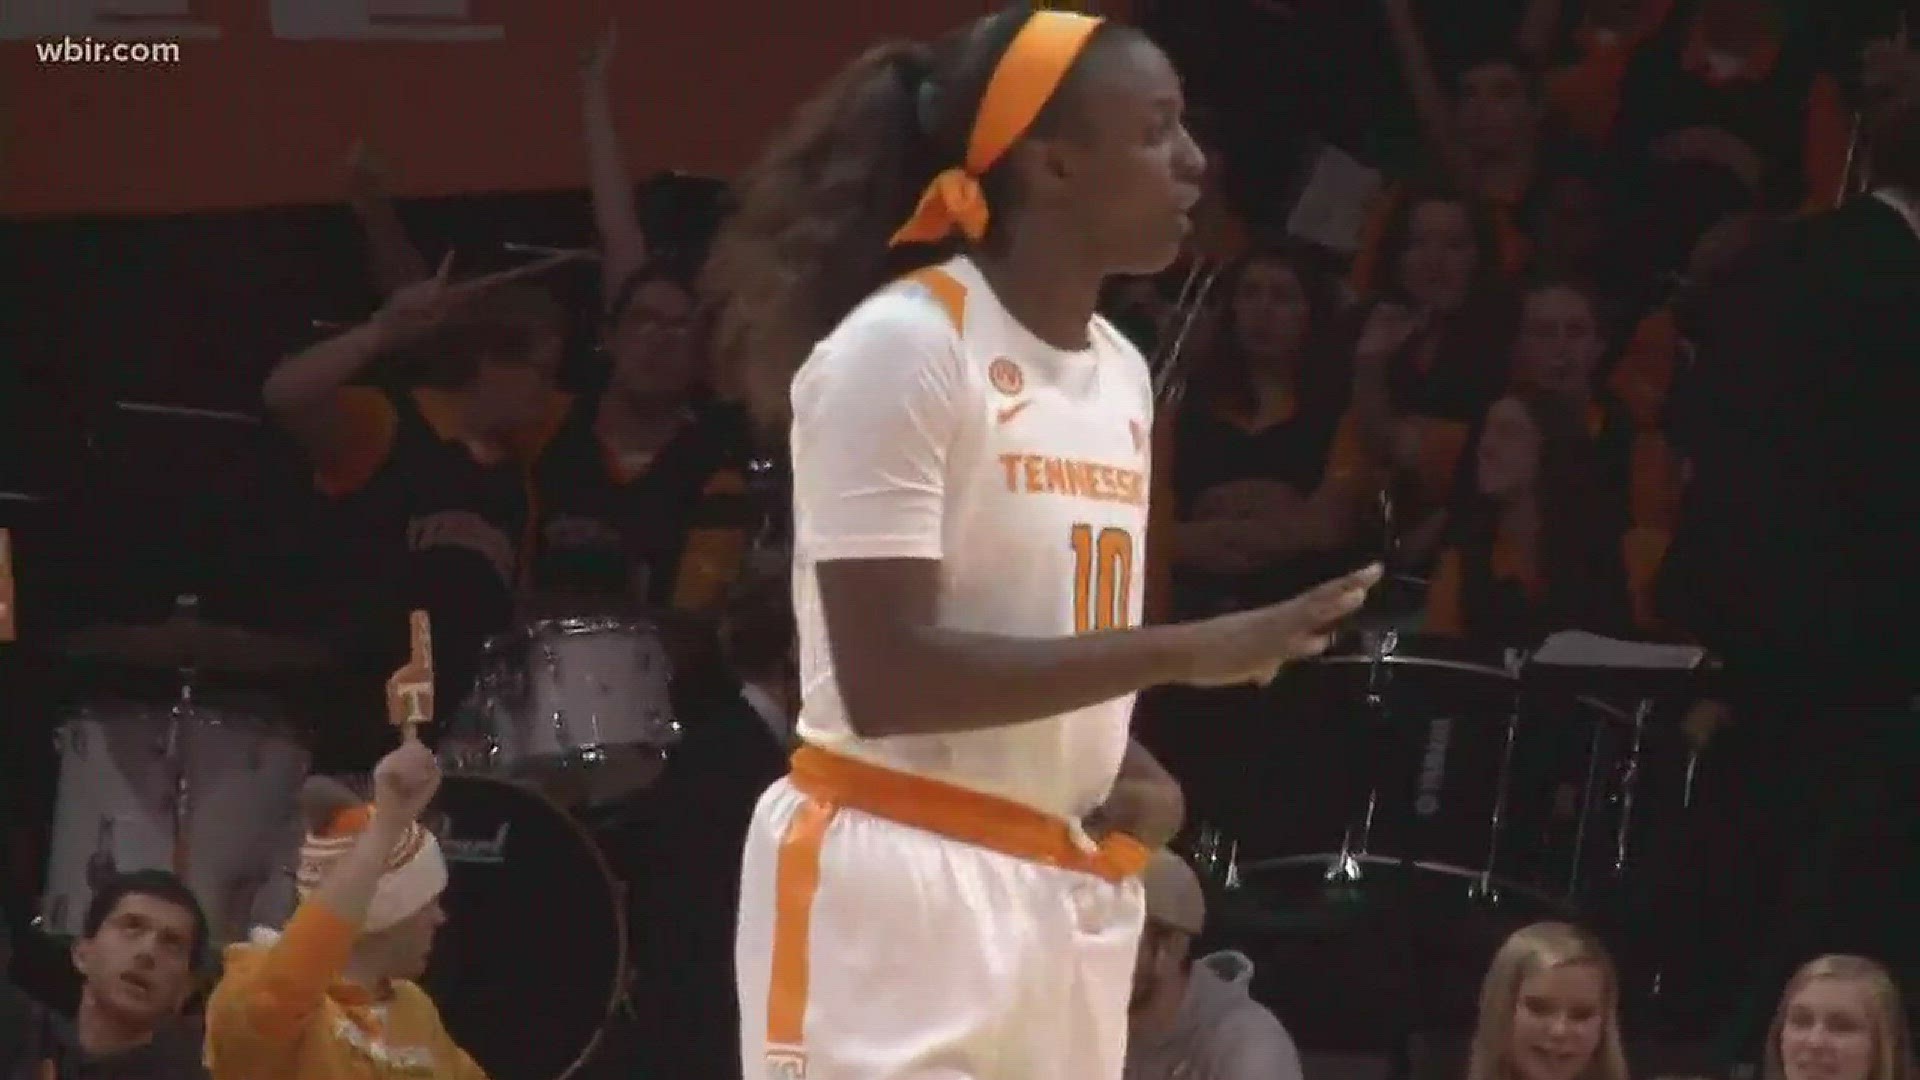 Jackson wasn't thrilled with her performance, but showed flashes of brilliance in Tennessee's win over Alabama State.